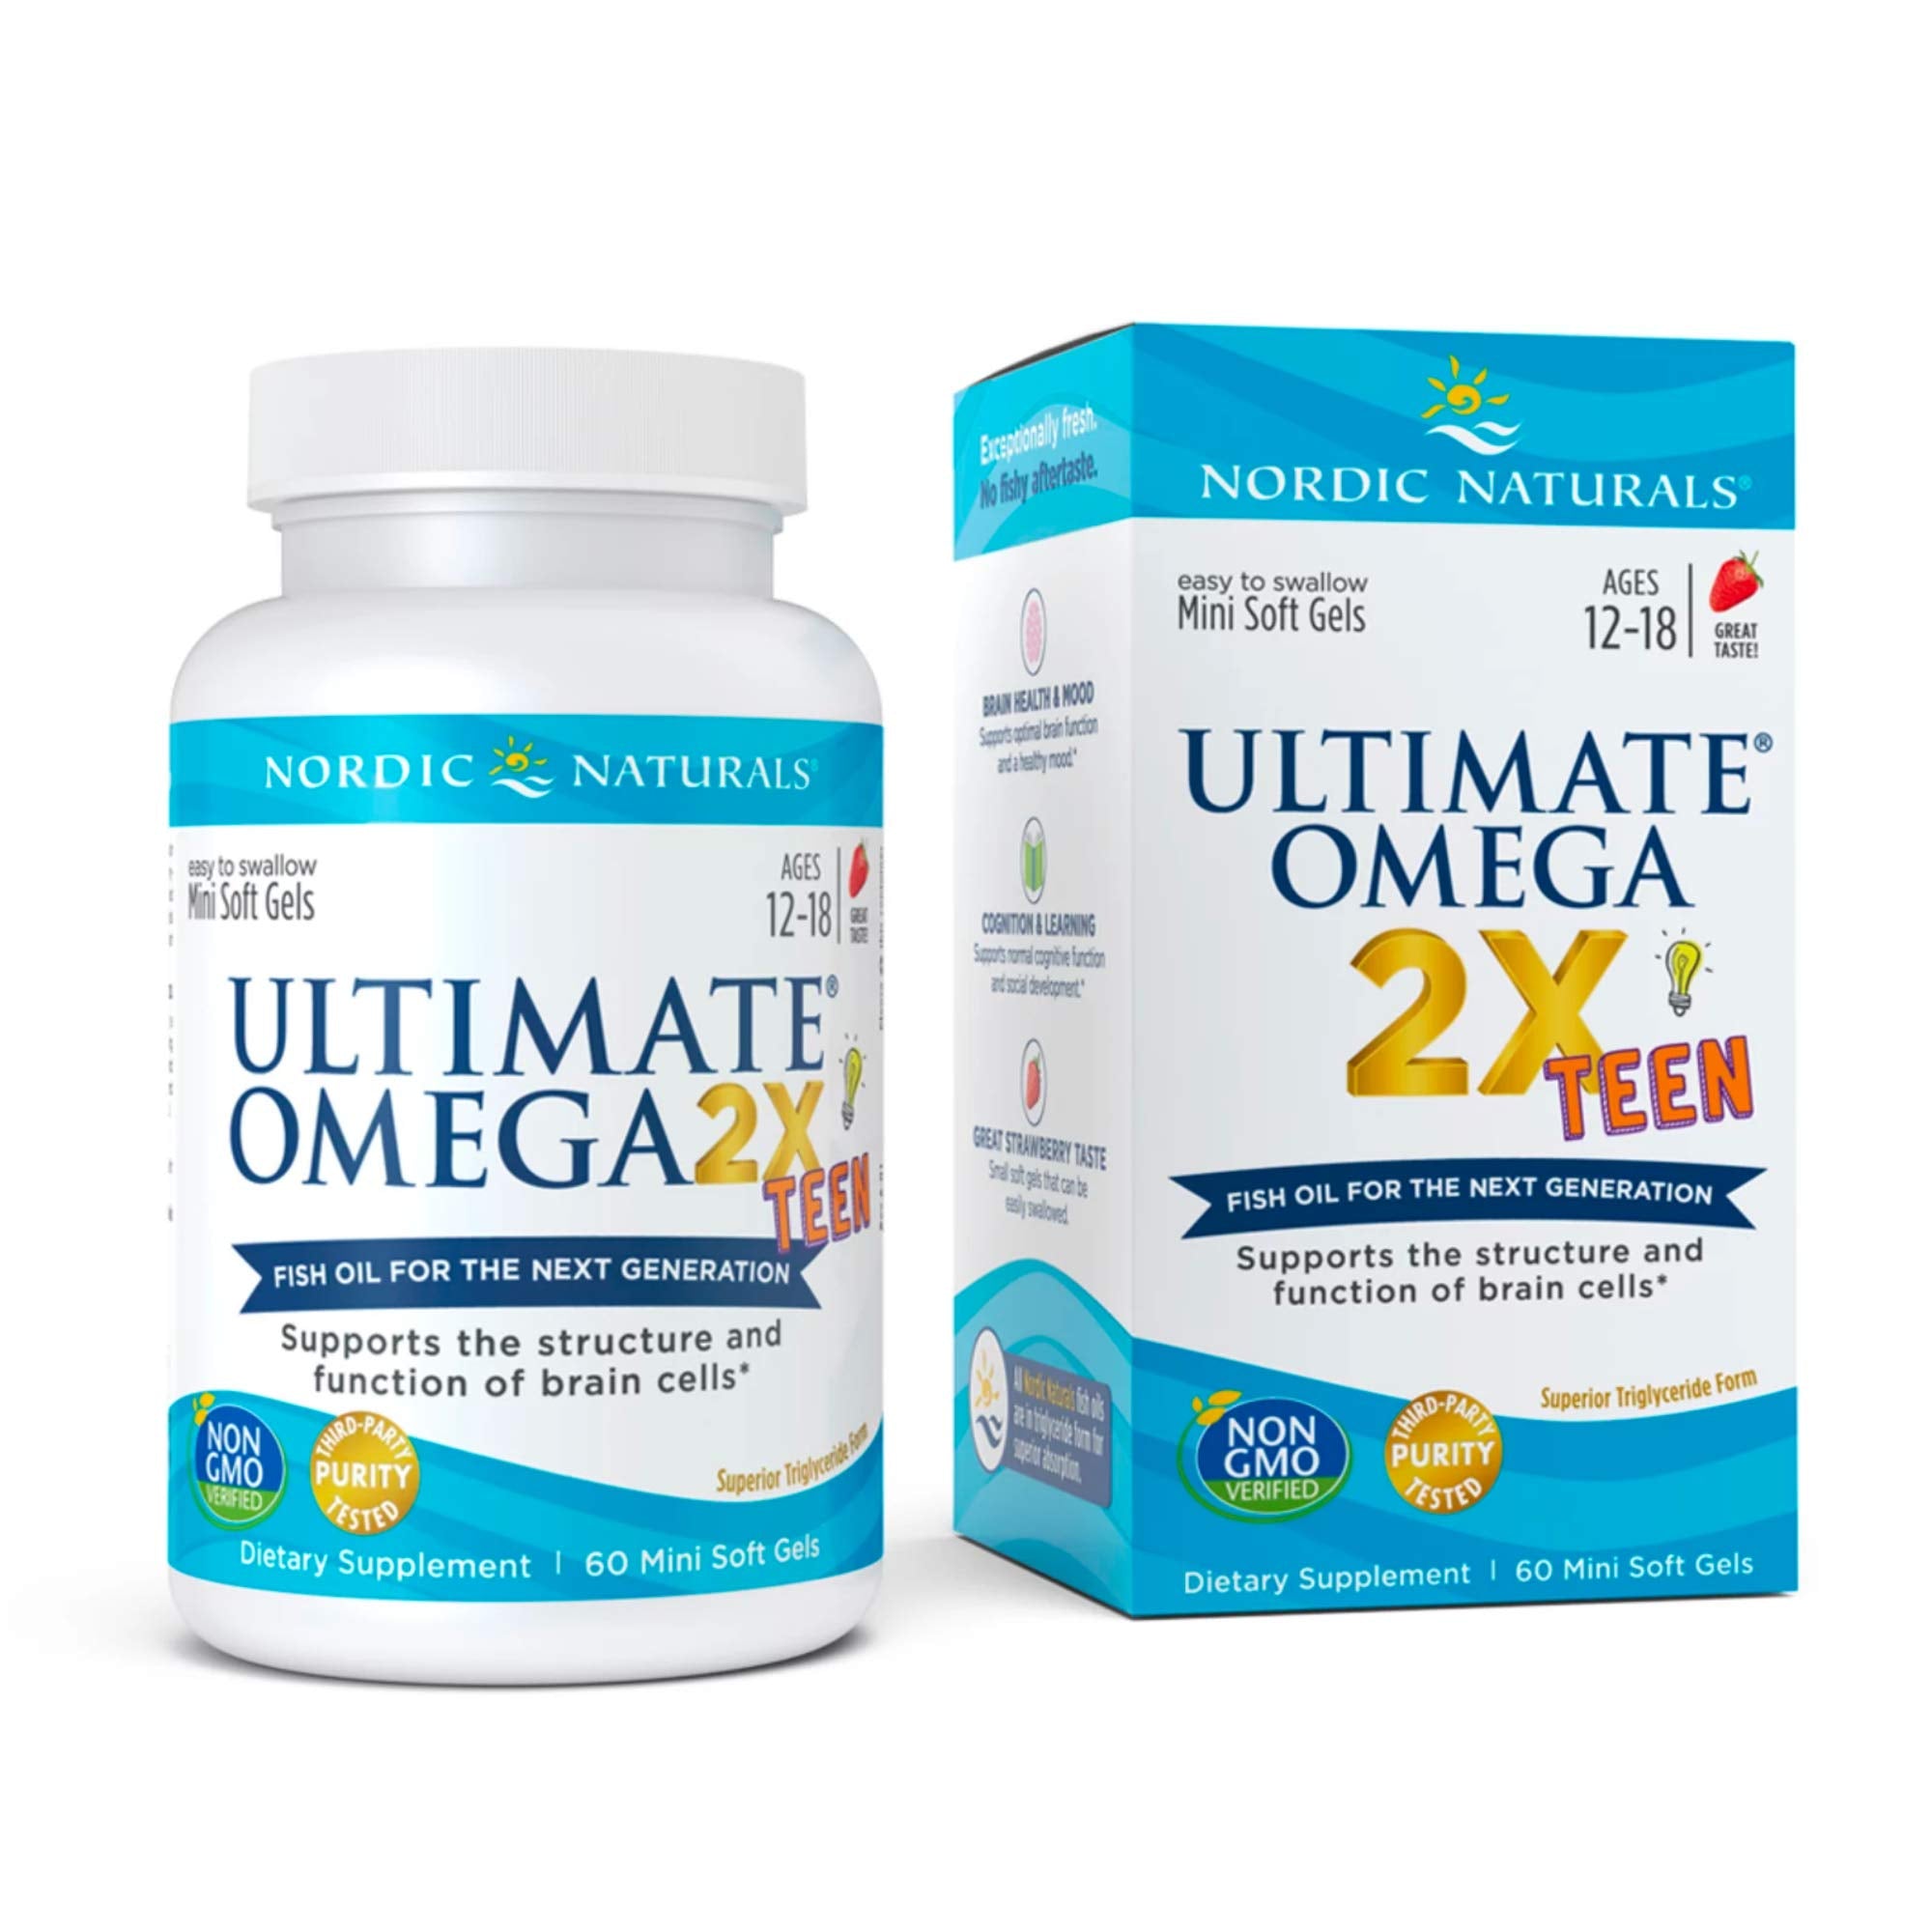 Nordic Naturals Ultimate Omega 2x Teen - Nordic Naturals Omega 3 Formula for Cognitive Development, Learning and Mood in Teenagers, Soft Gels - 60 Count